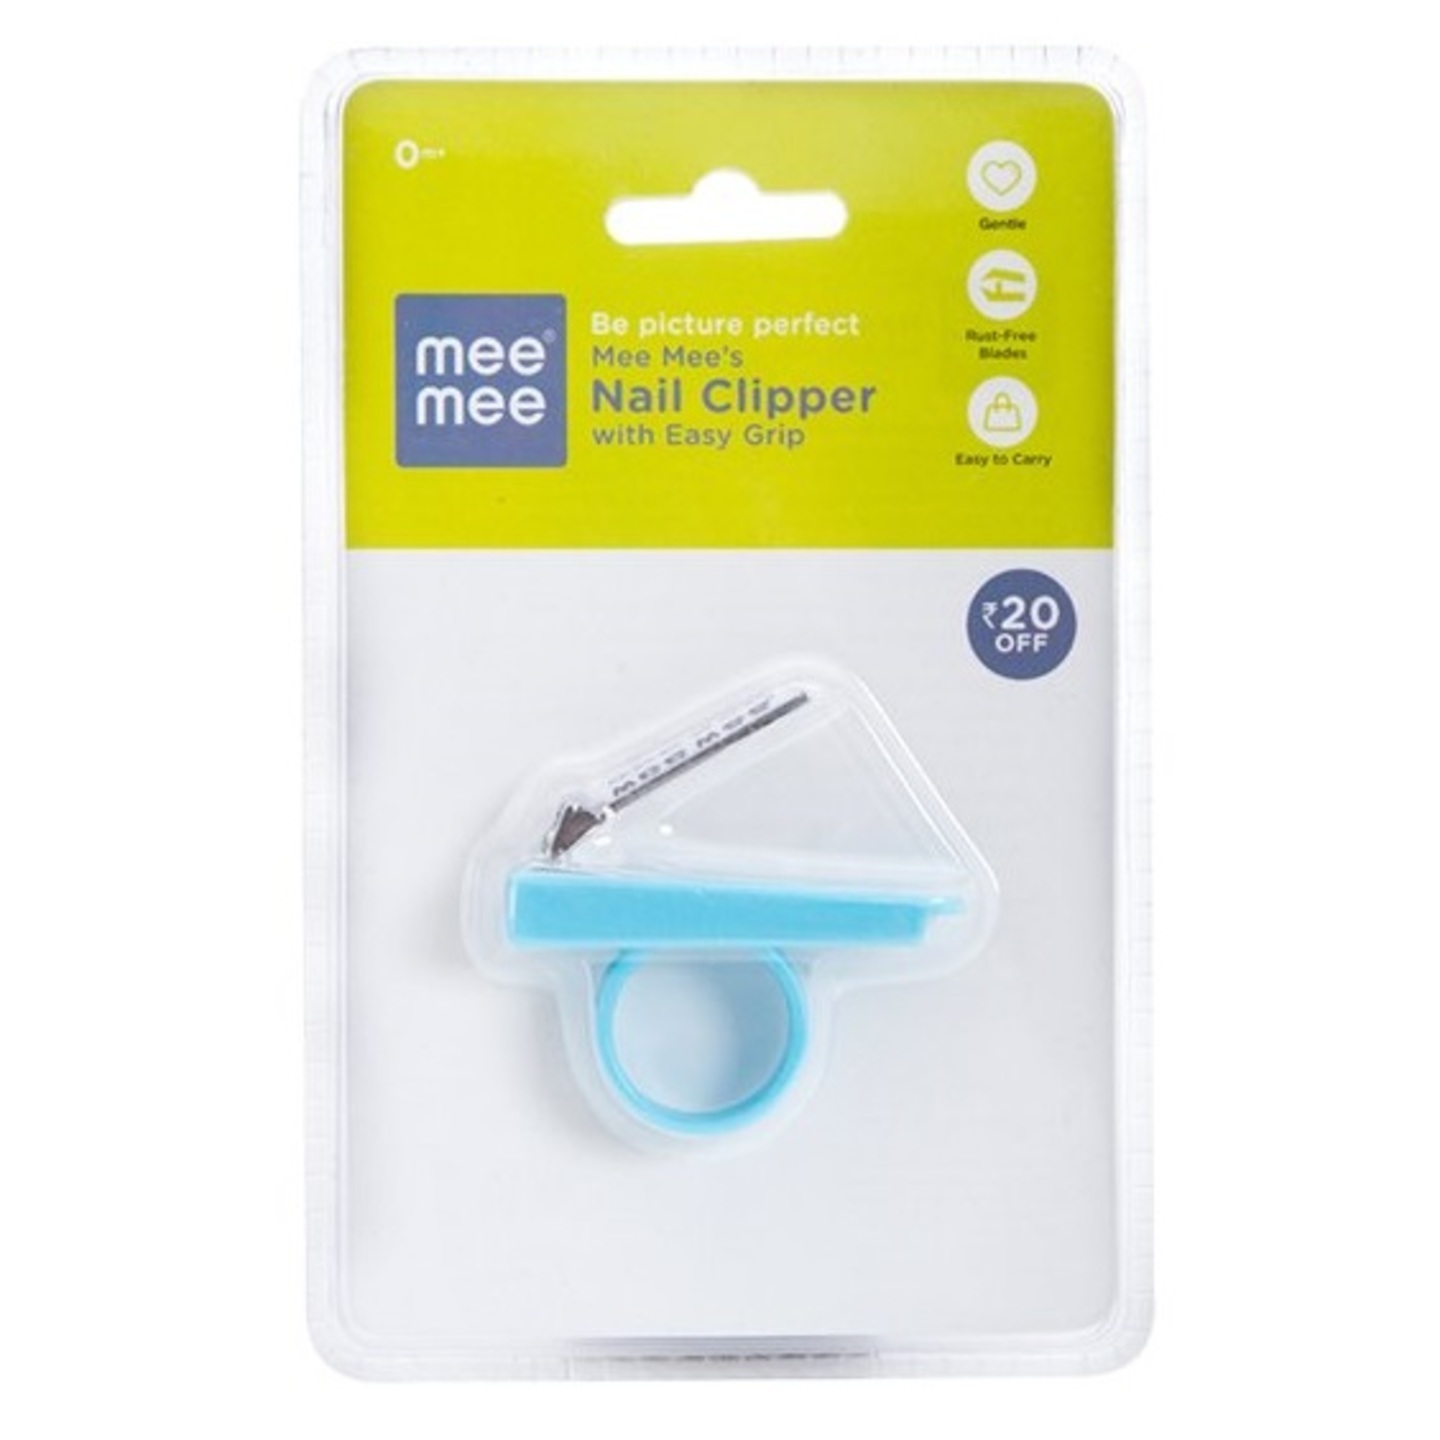 Mee Mee Gentle Nail Clipper with Easy Grip